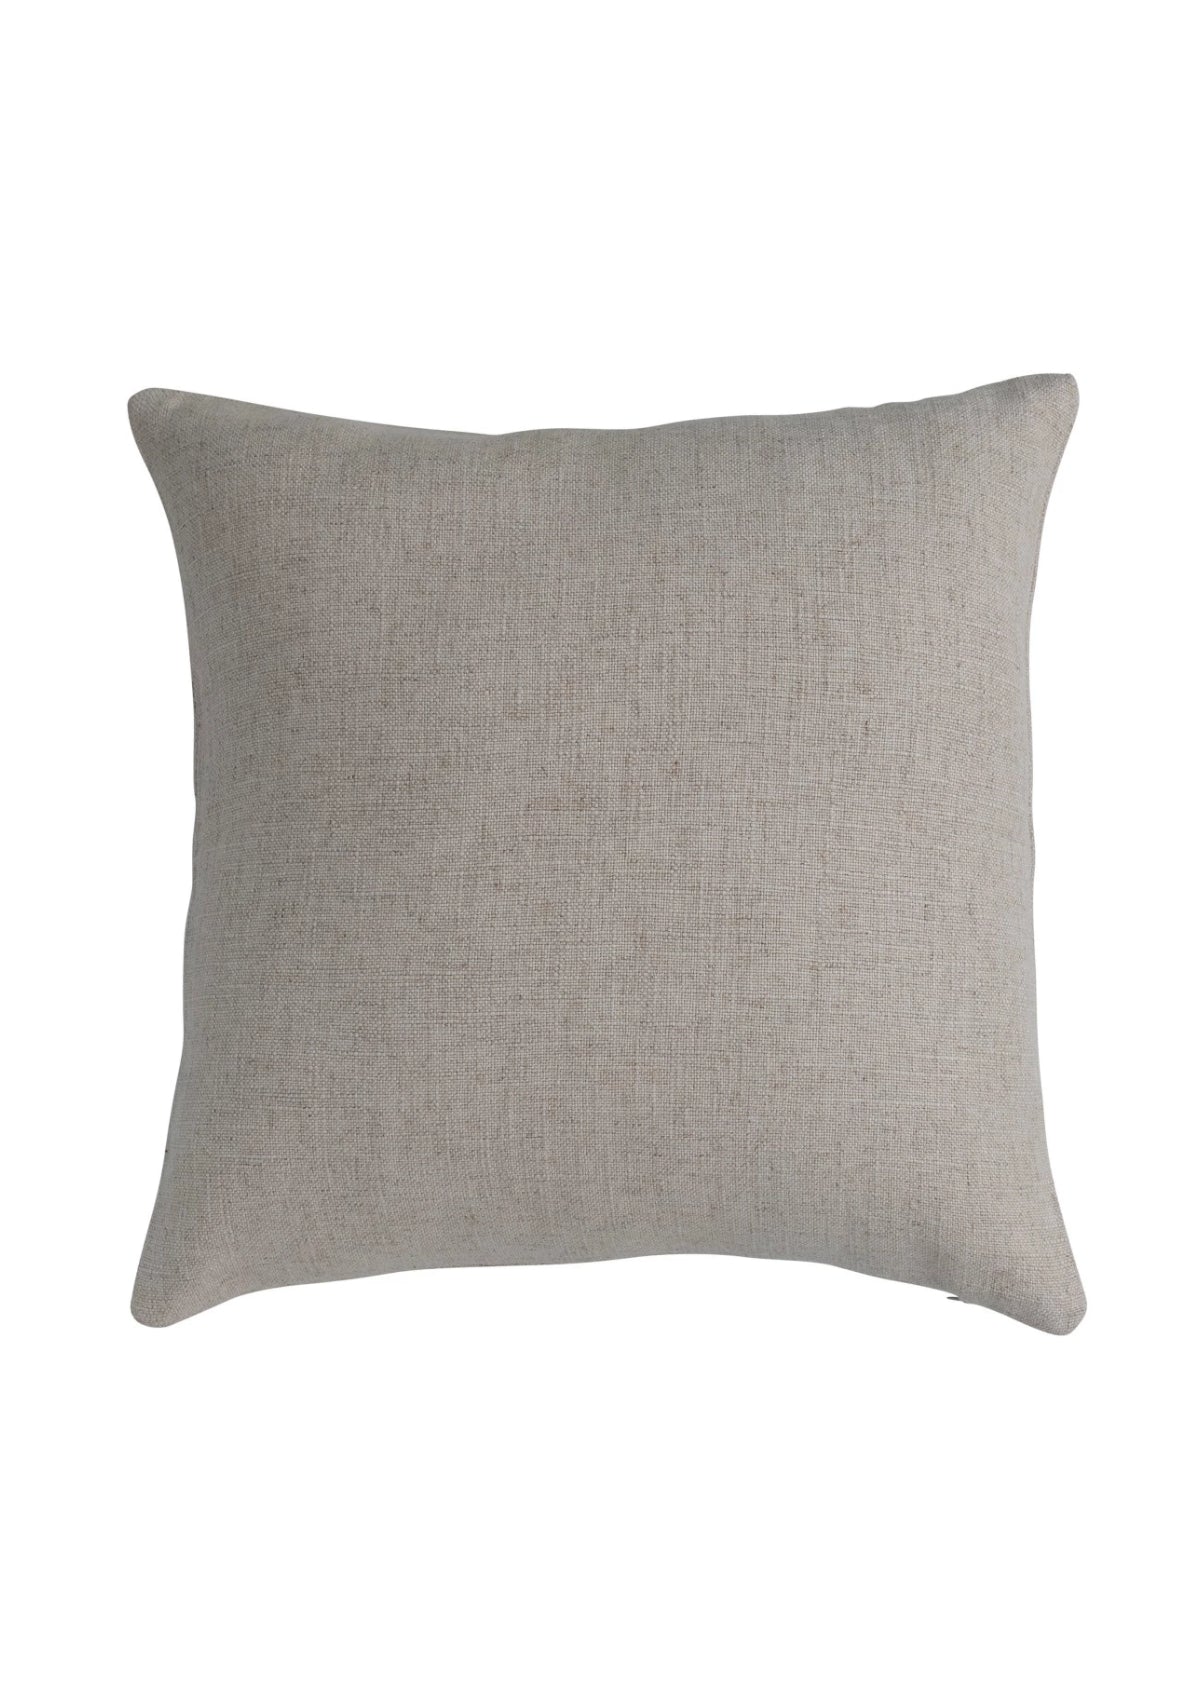 Embroidered Square Linen Blend Pillow -Creative Co-op- Ruby Jane-